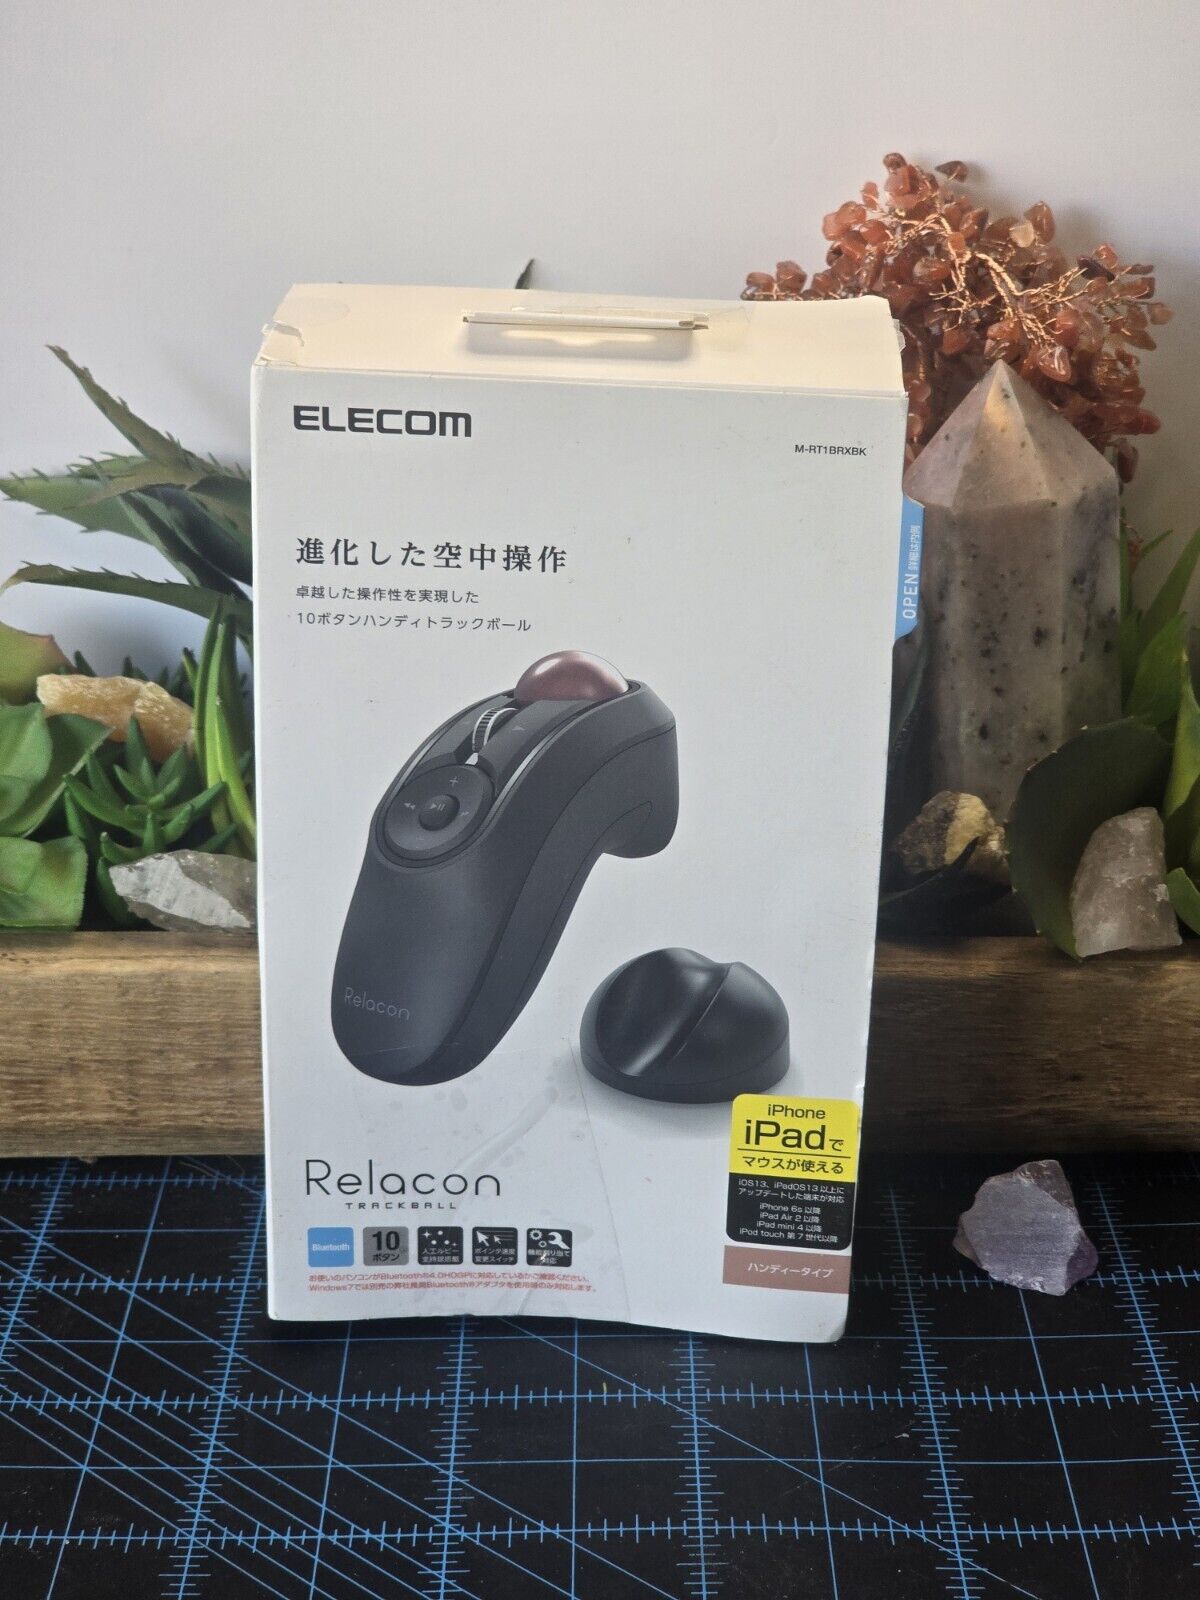 ELECOM Handheld Bluetooth Thumb-Operated Trackball Mouse 10-Button Function